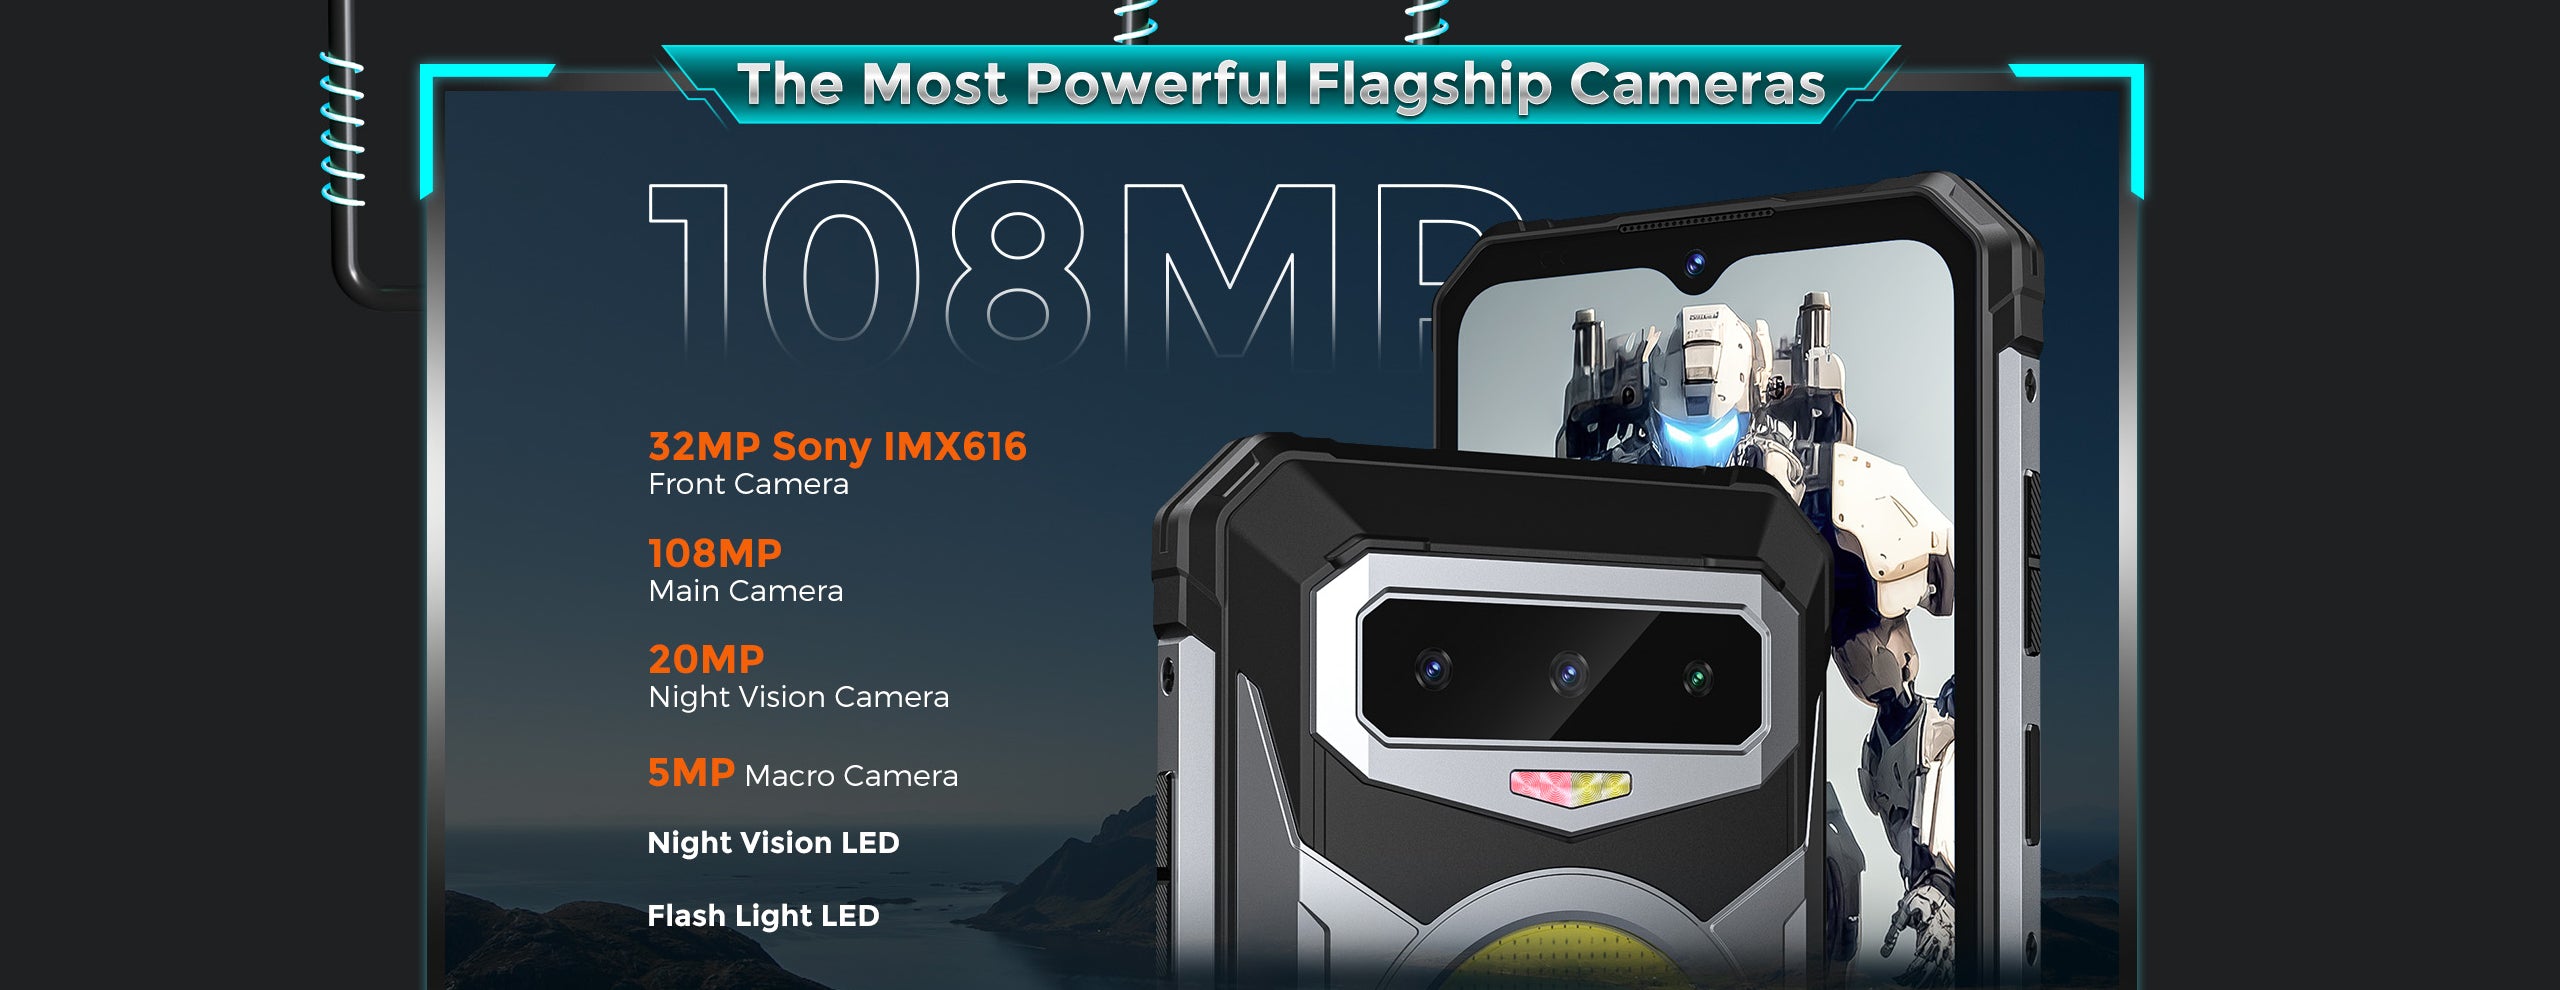 The Most Powerful Flagship Cameras